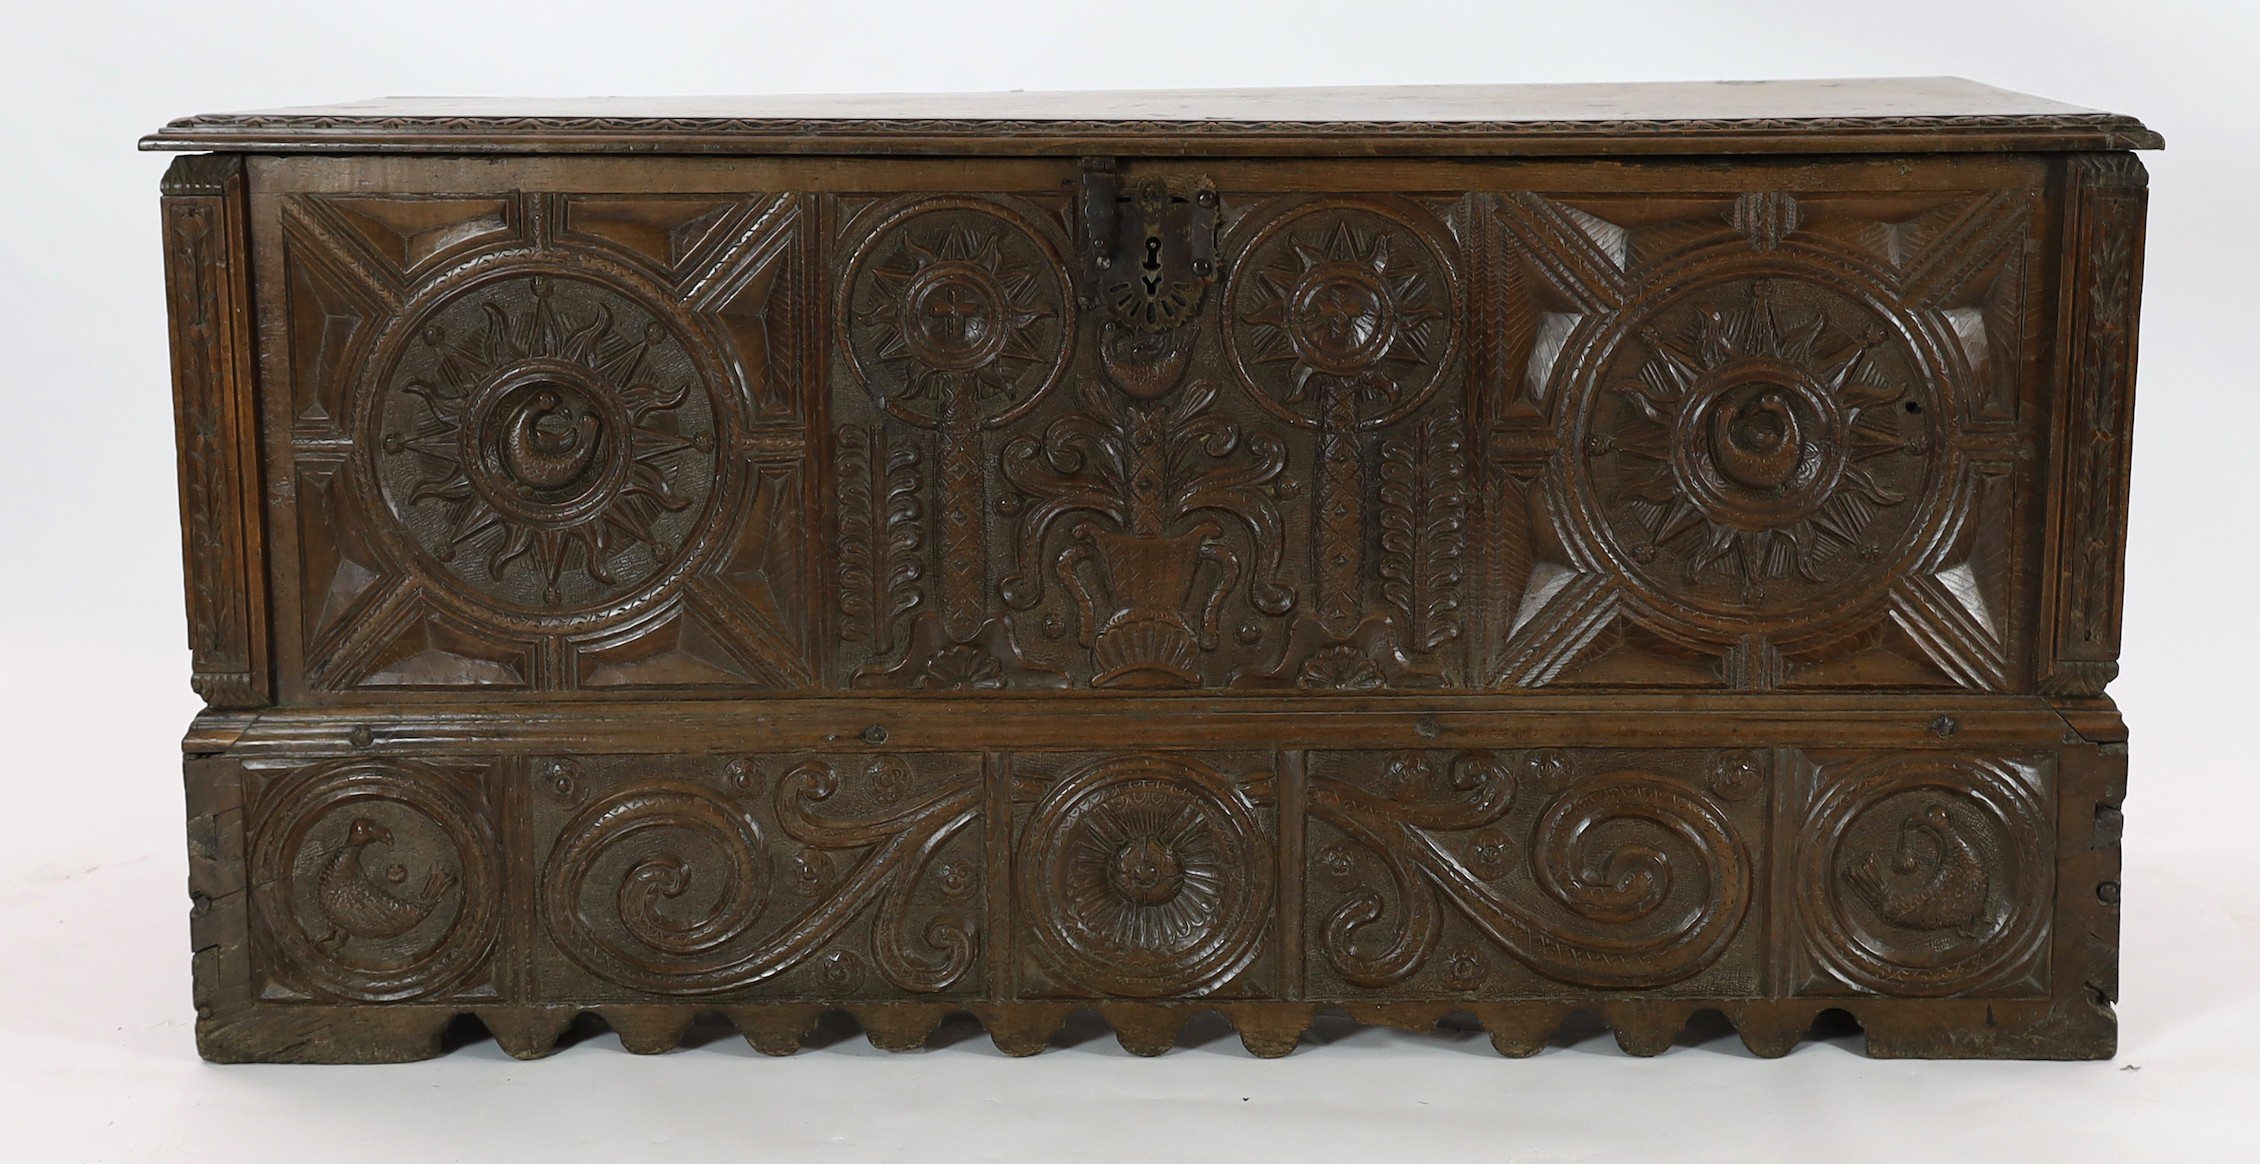 An 18th century Spanish chestnut coffer, carved in relief with a central fountain flanked by - Image 2 of 4